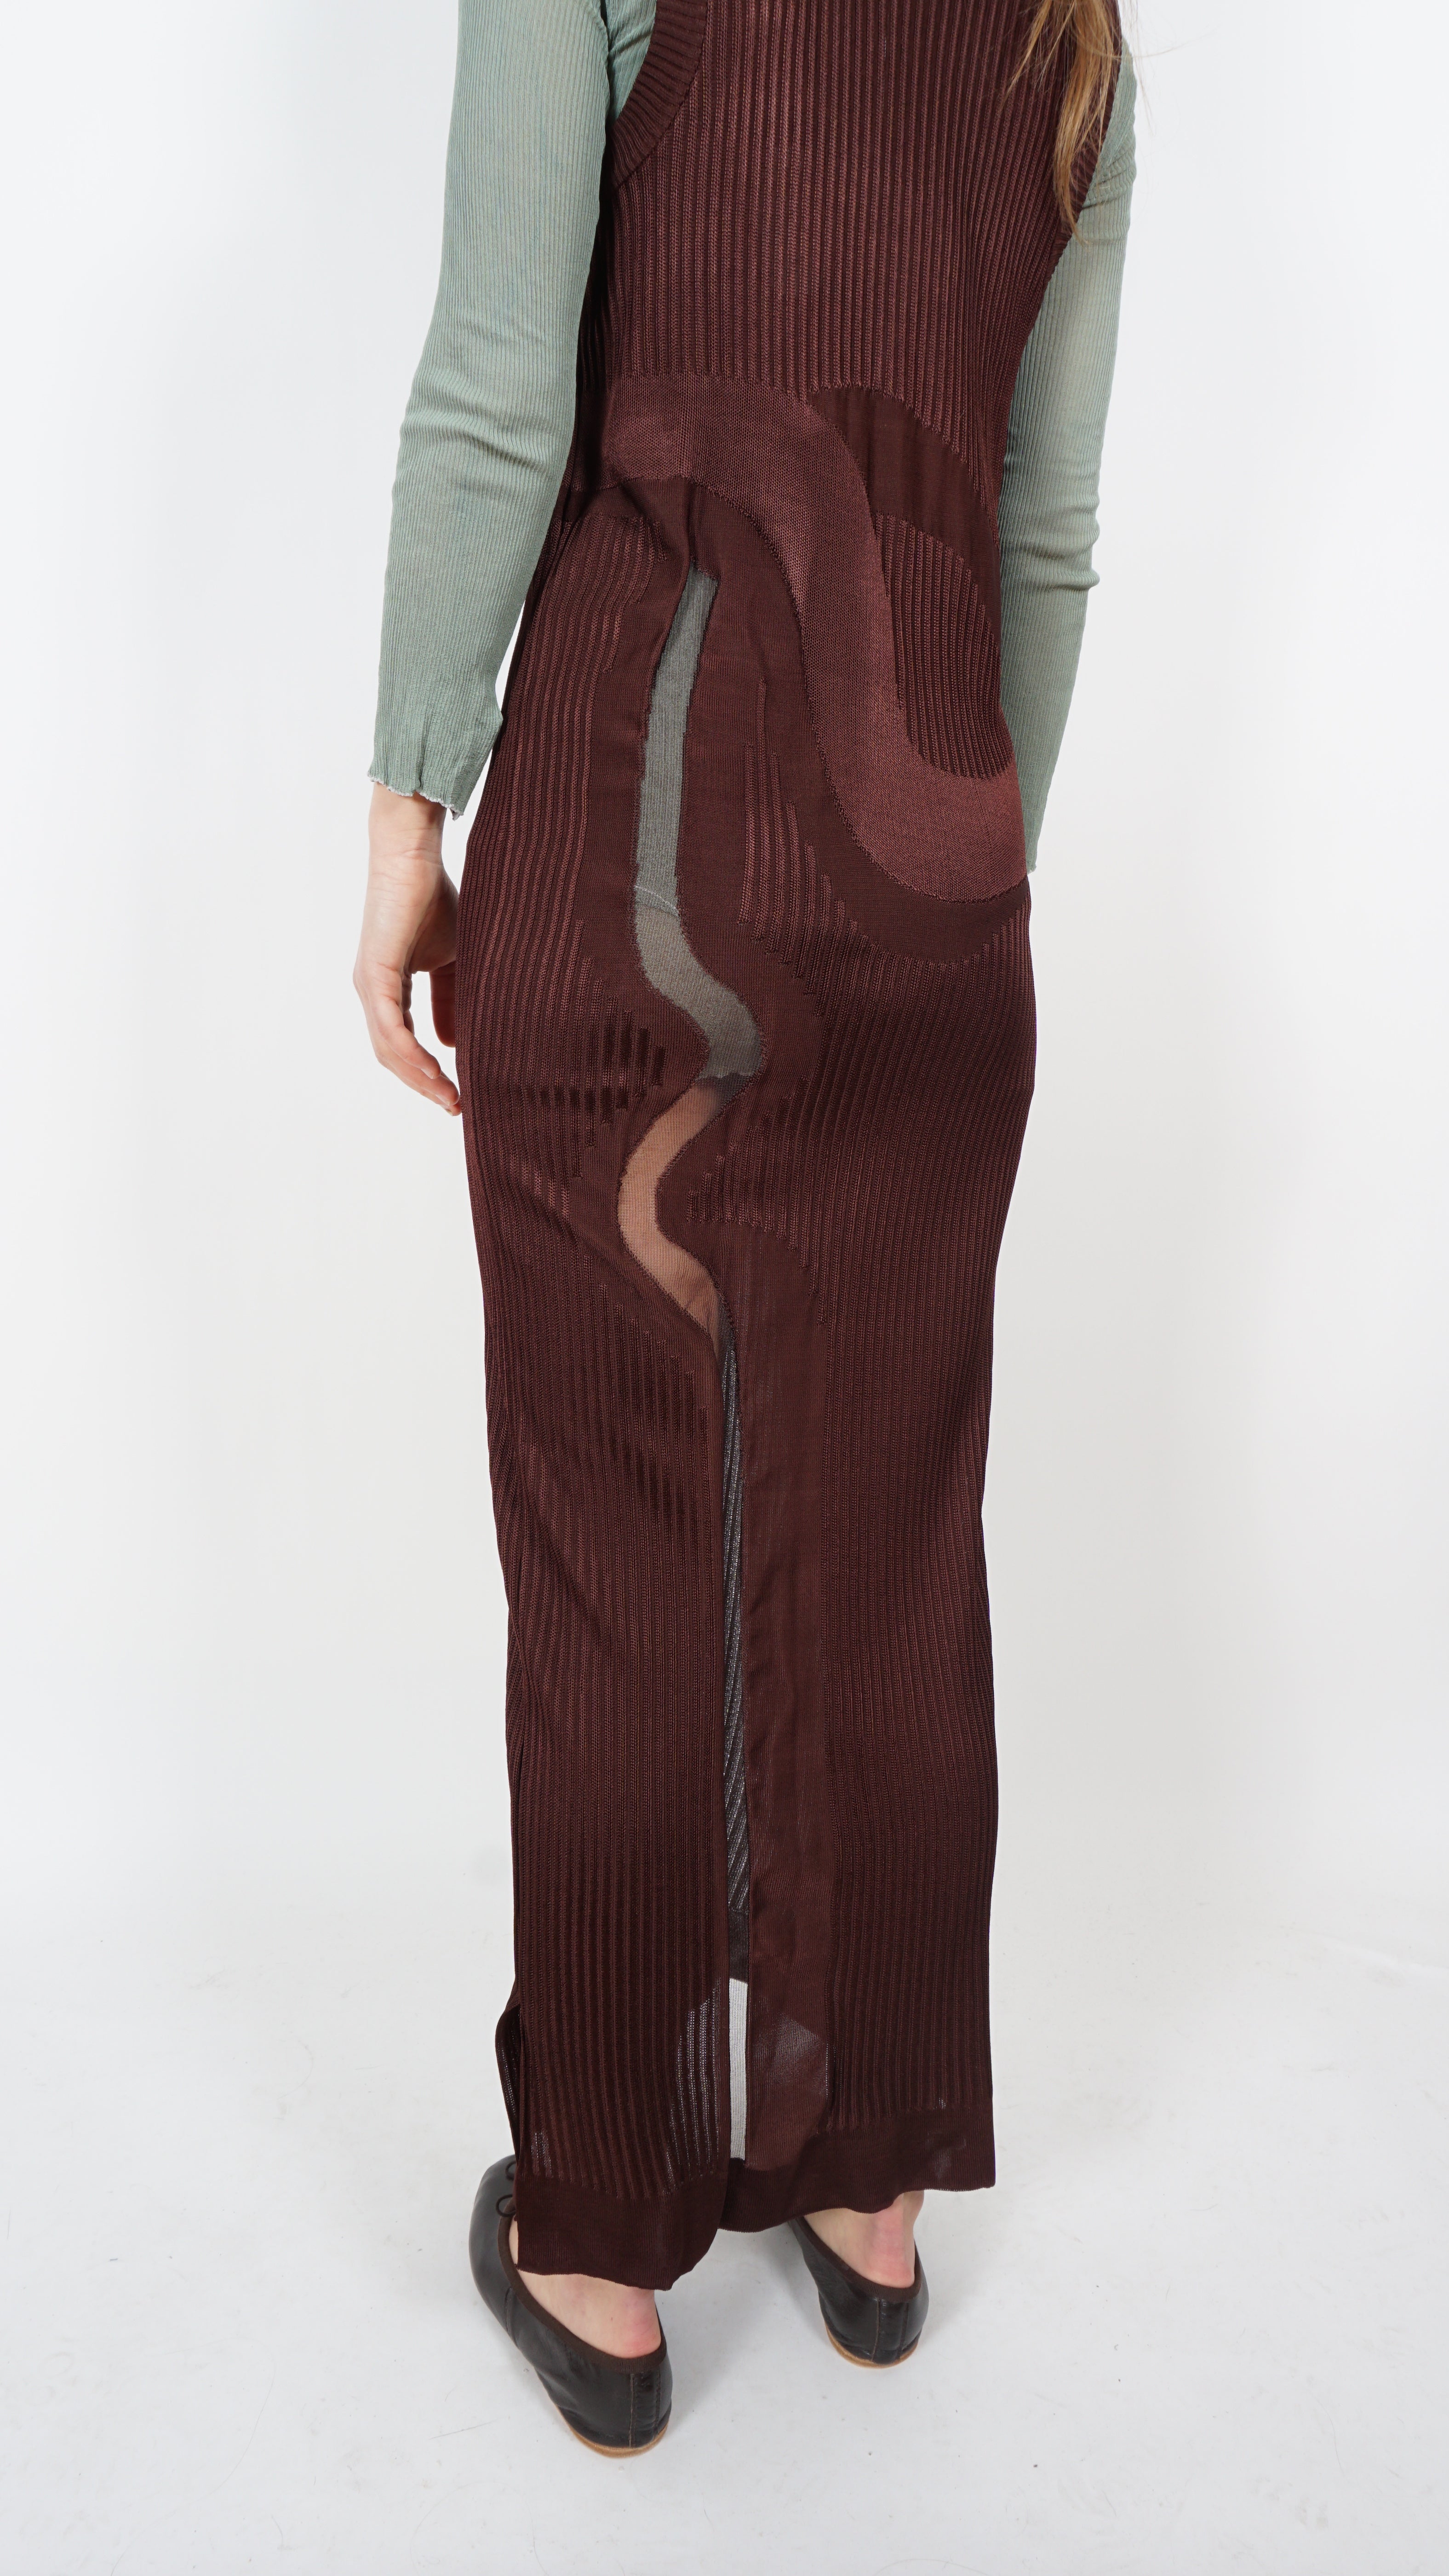 Long Squiggle dress by Nadia Wire